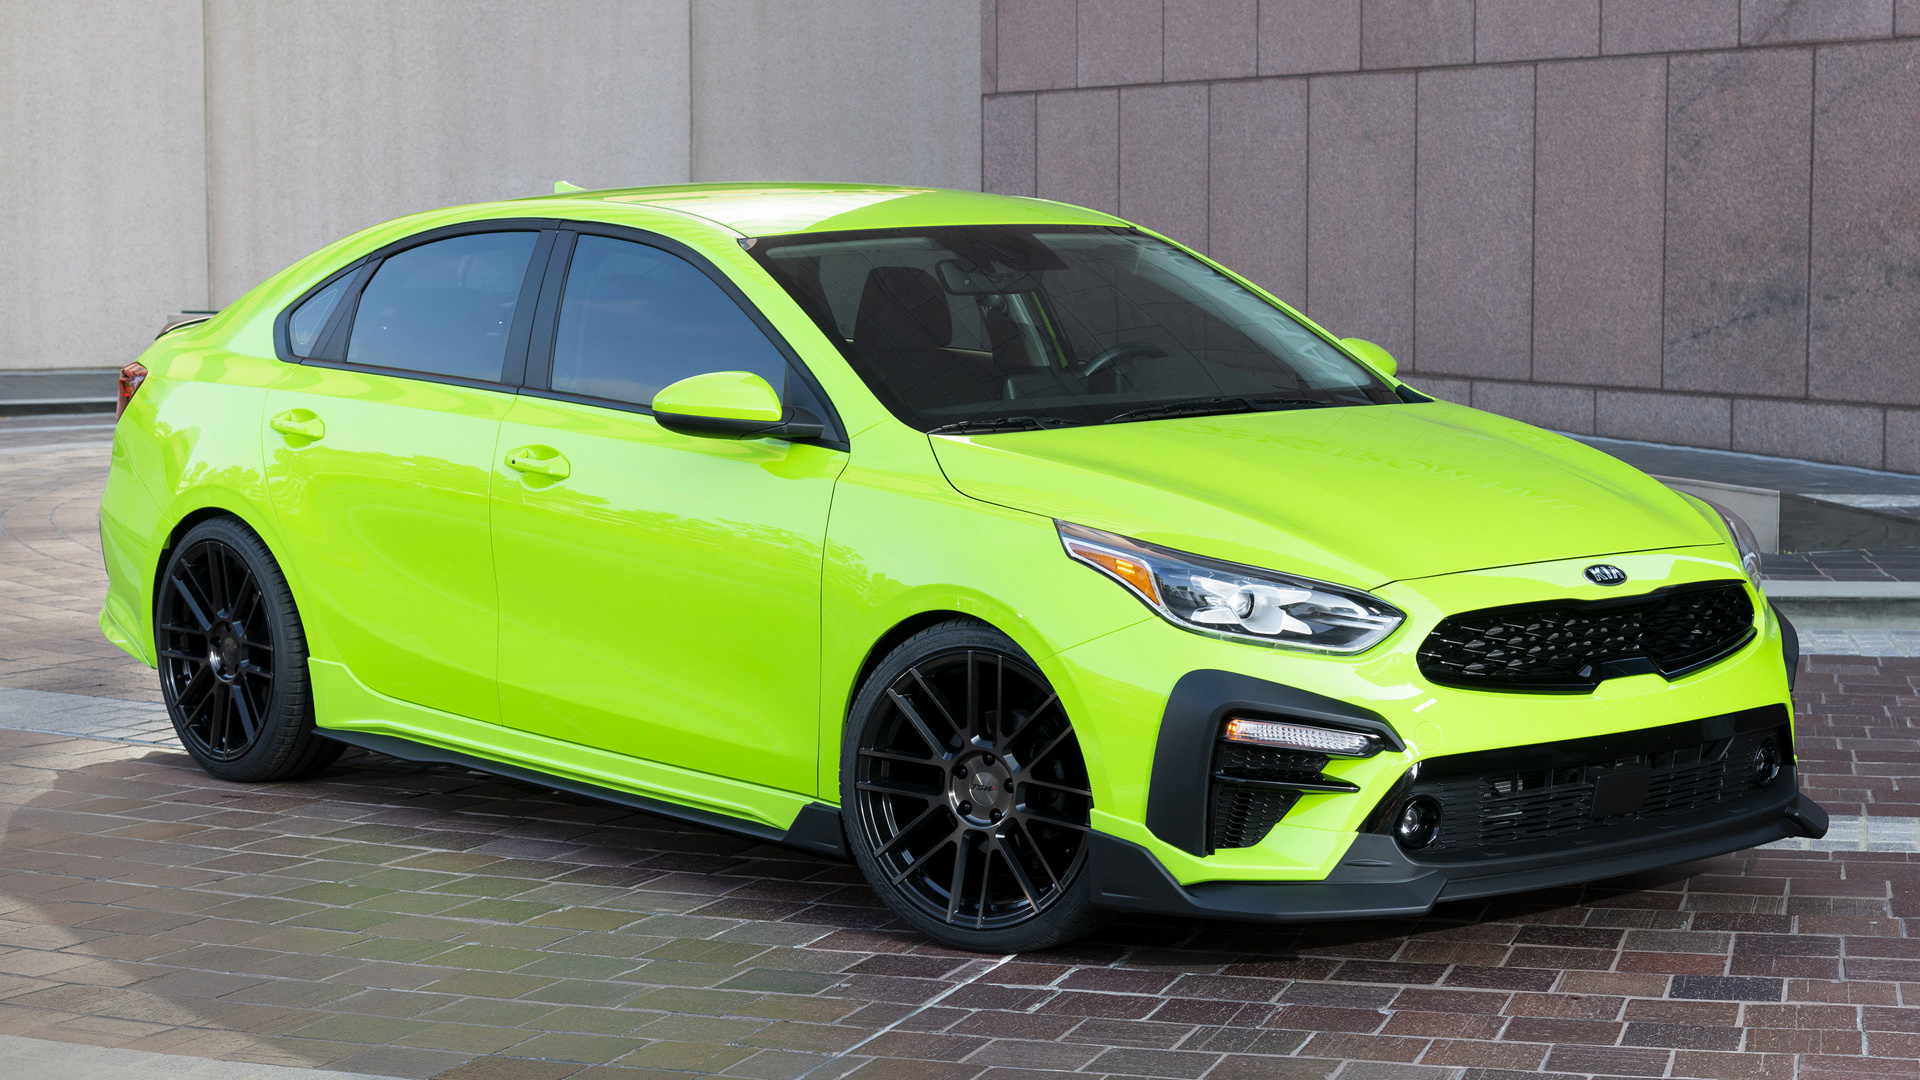 2018 Kia Forte Federation - Wallpapers and HD Images | Car Pixel